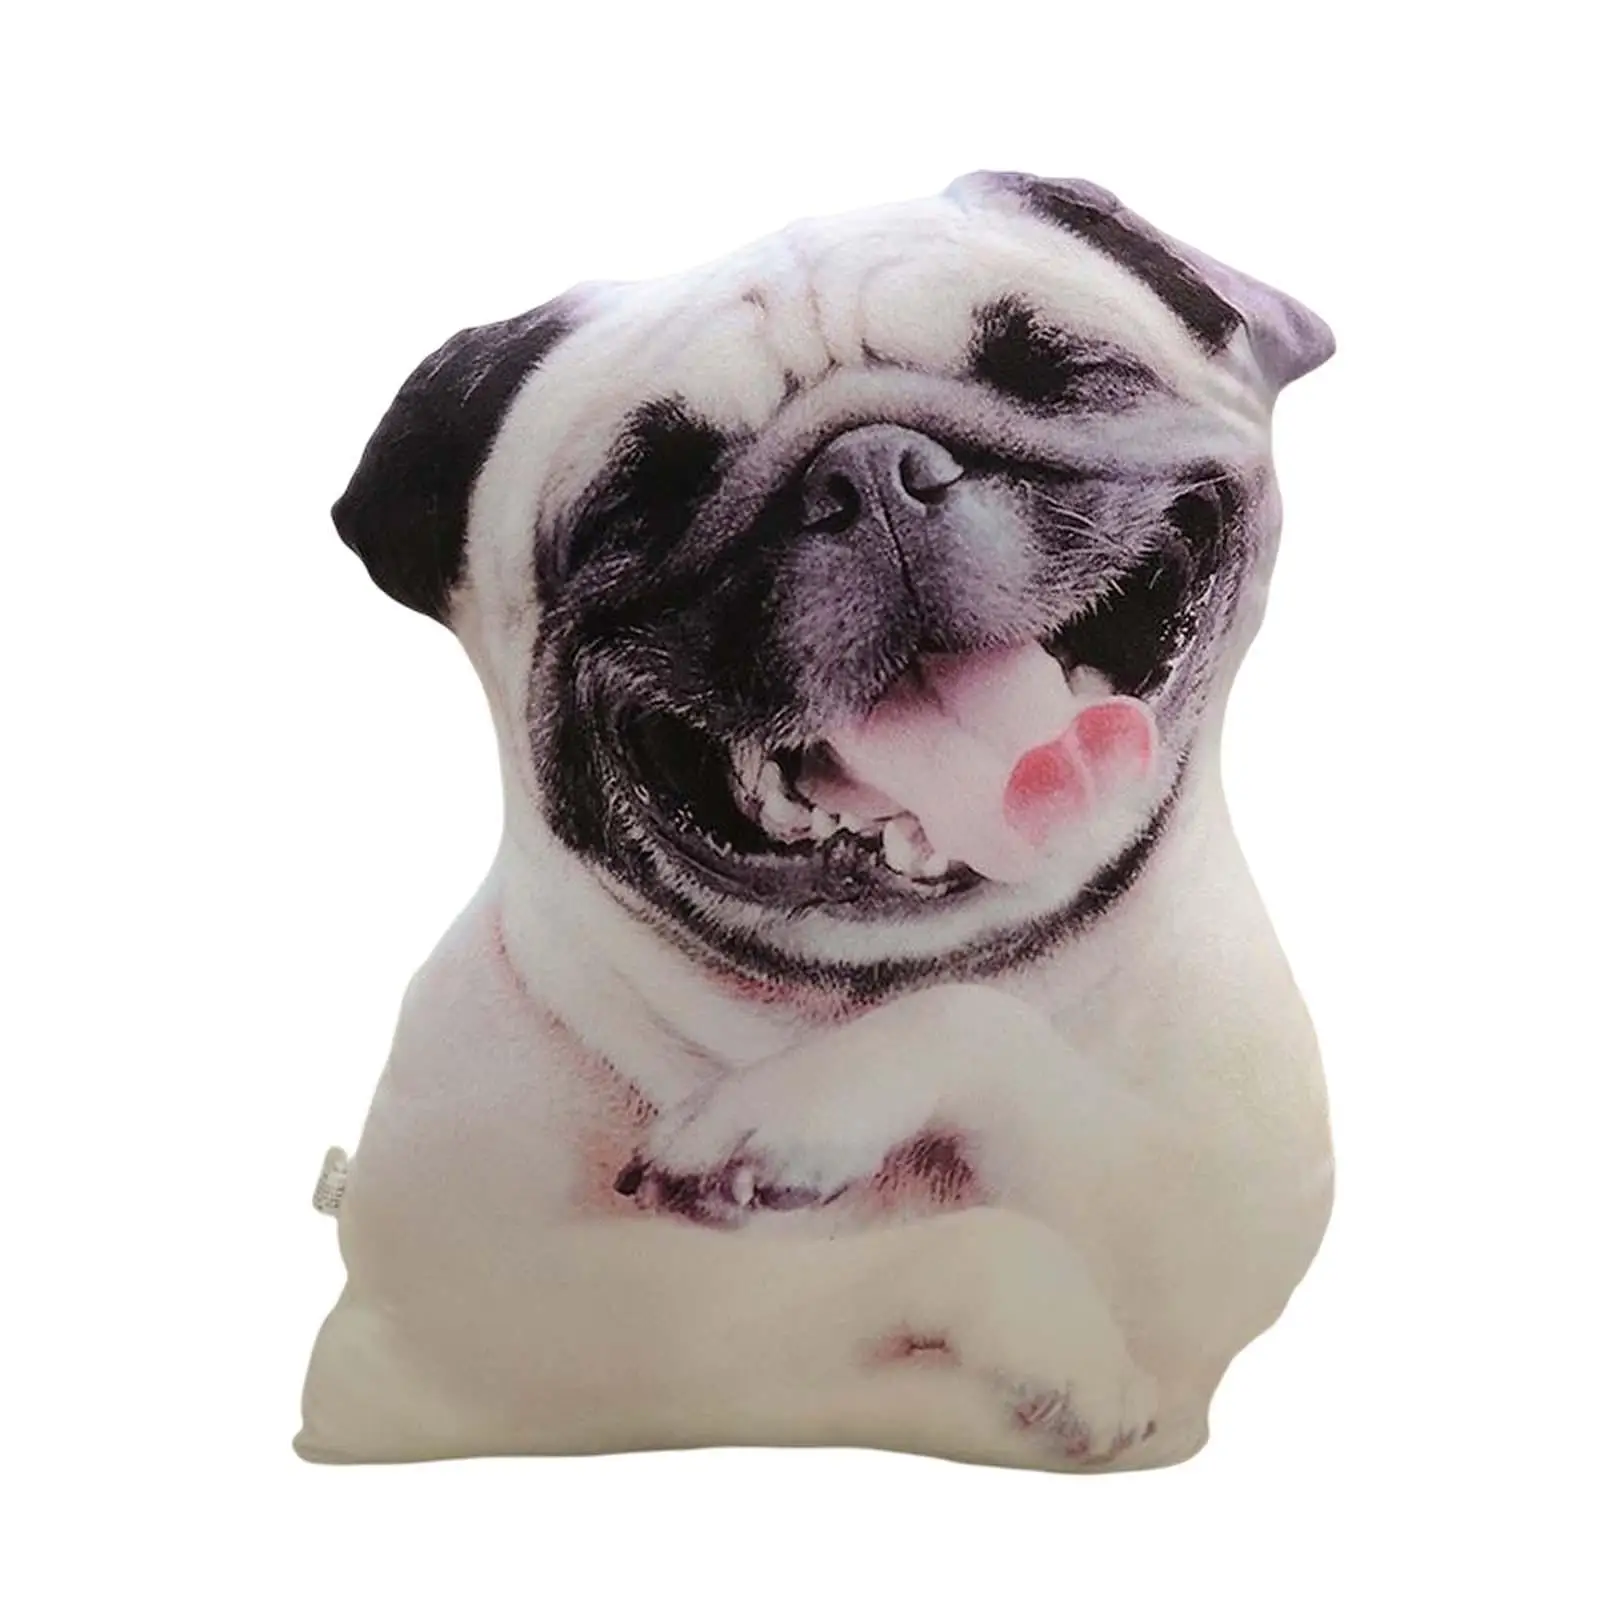 3D Dog Printed Pillow Cushion Toy Cushion 35inch for Couch, Bed, Car, and Office Outside Wrapped by Short Plush Funny Washable